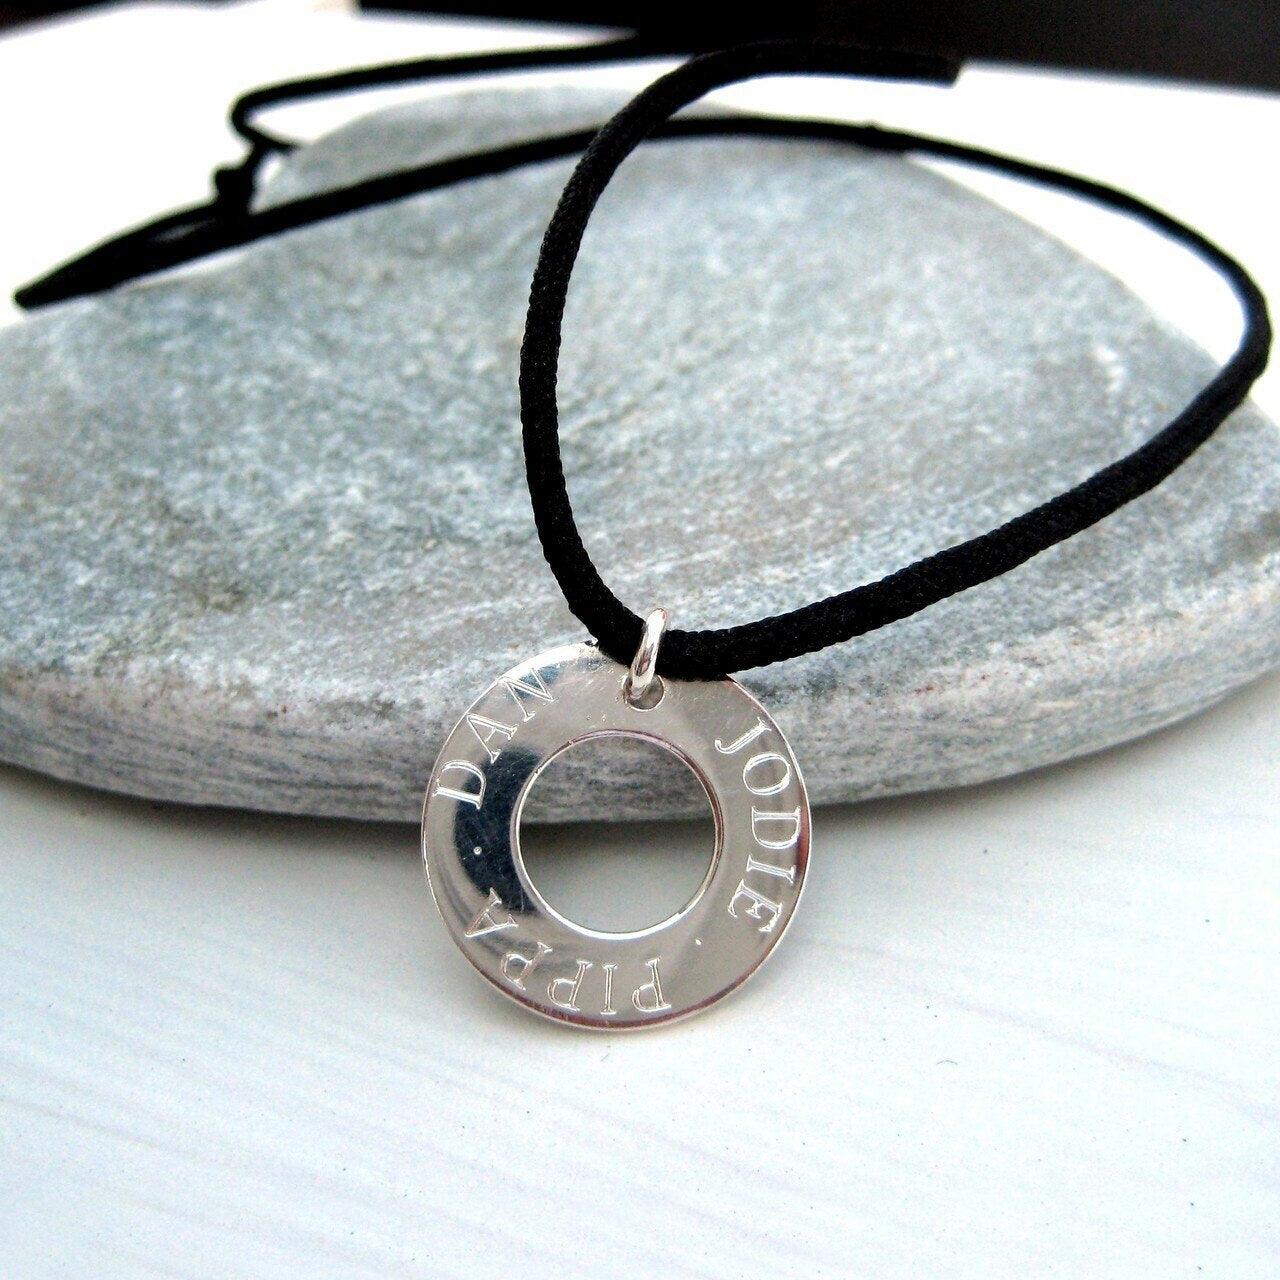 Personalised Eternity Cord Necklace With a Sterling Silver Disk - Shop Personalised Gifts